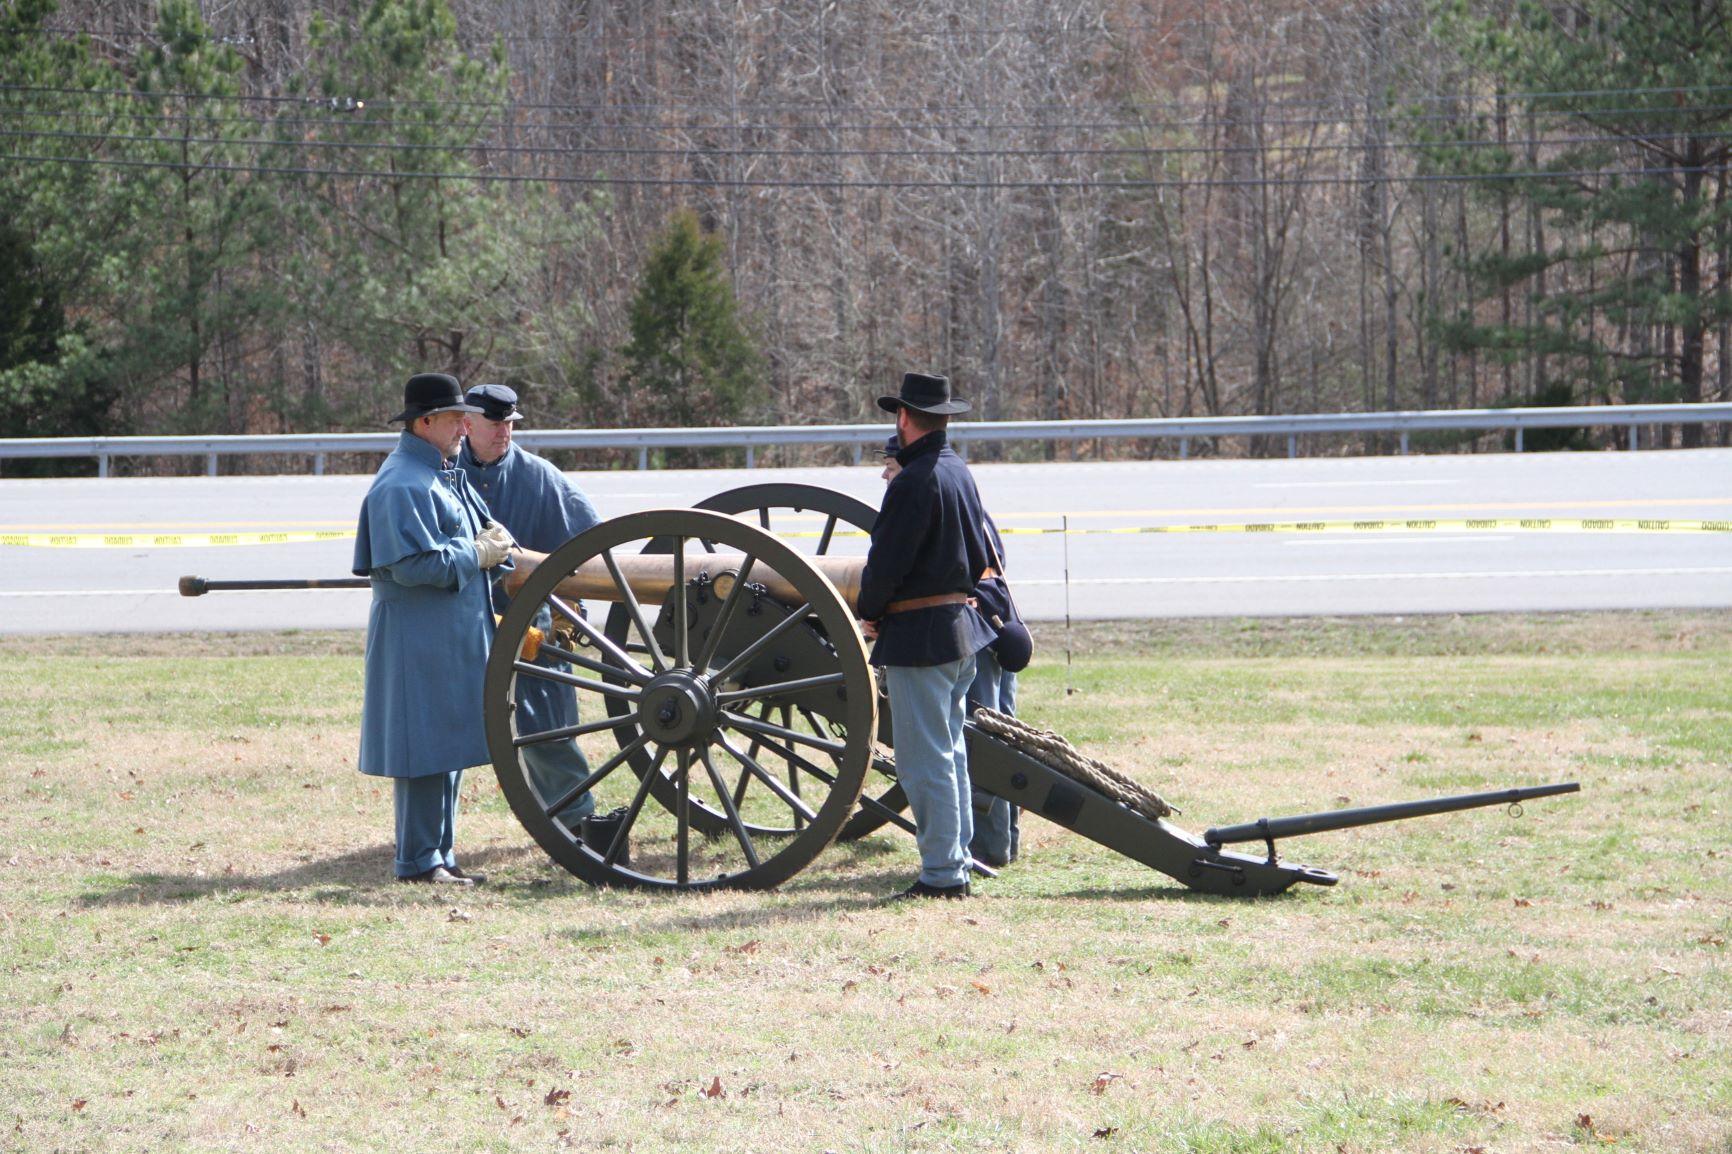 cannon and costumed volunteers